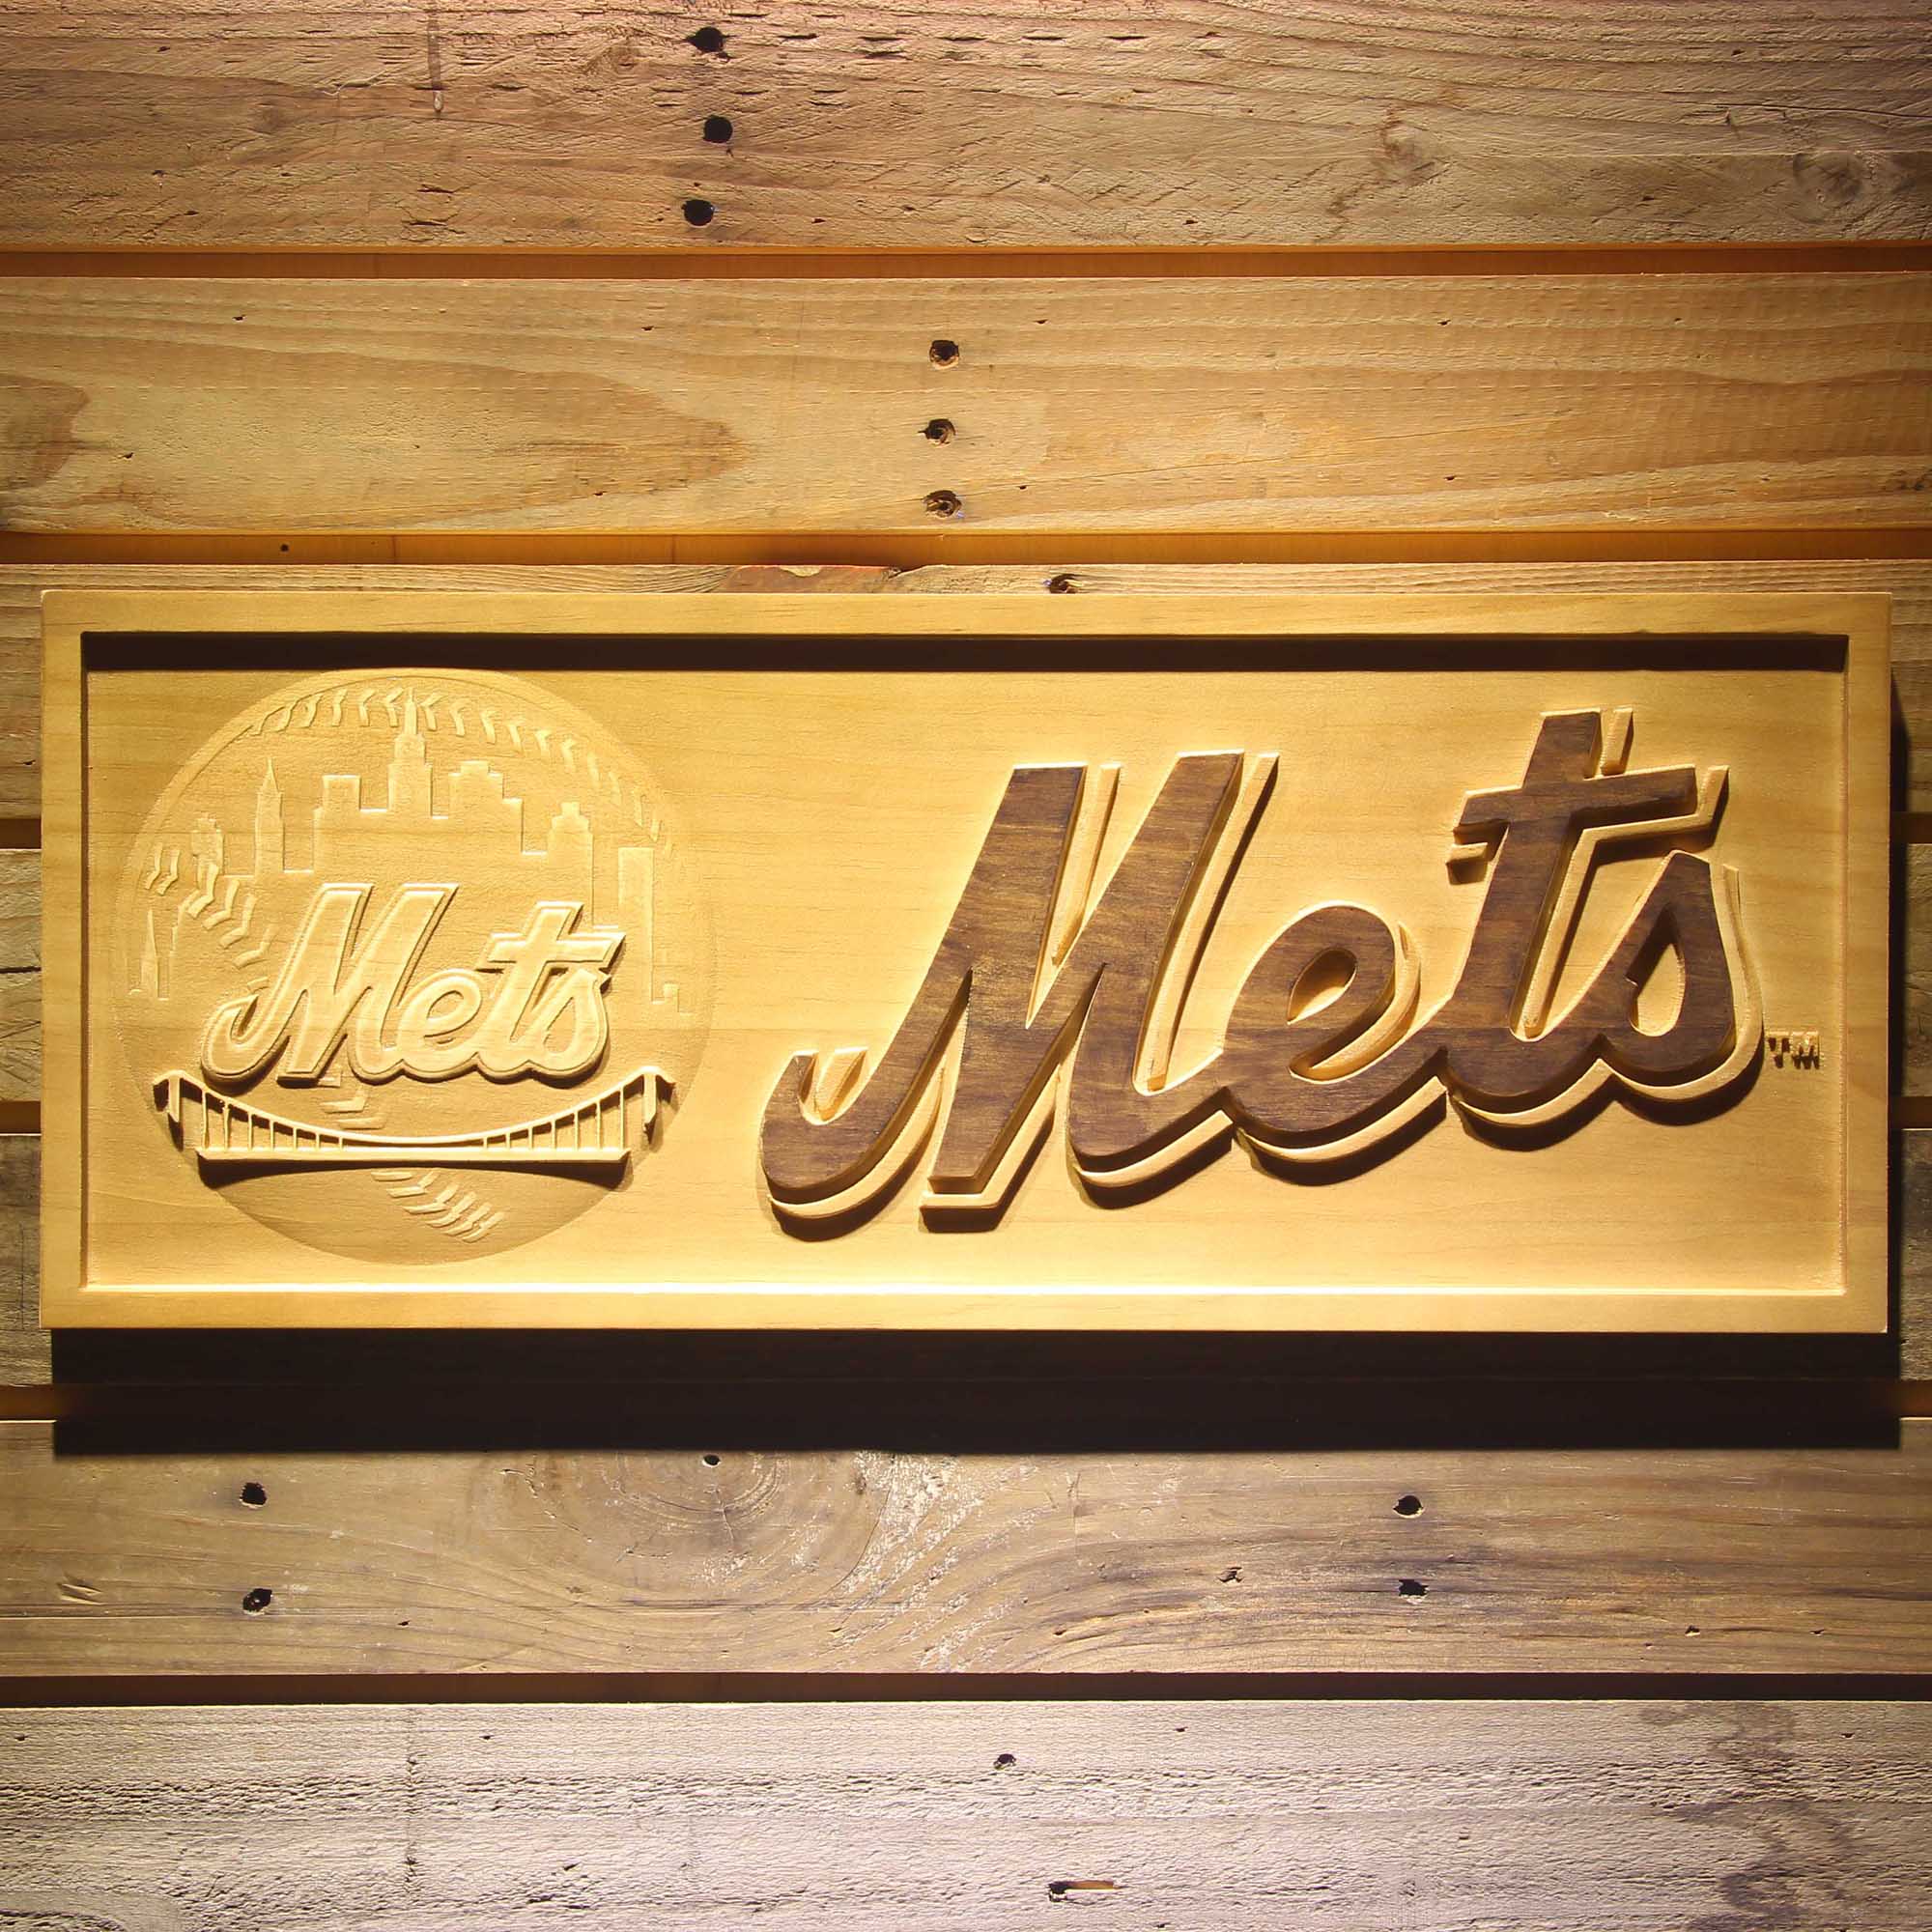 New York Mets 3D Solid Wooden Craving Sign